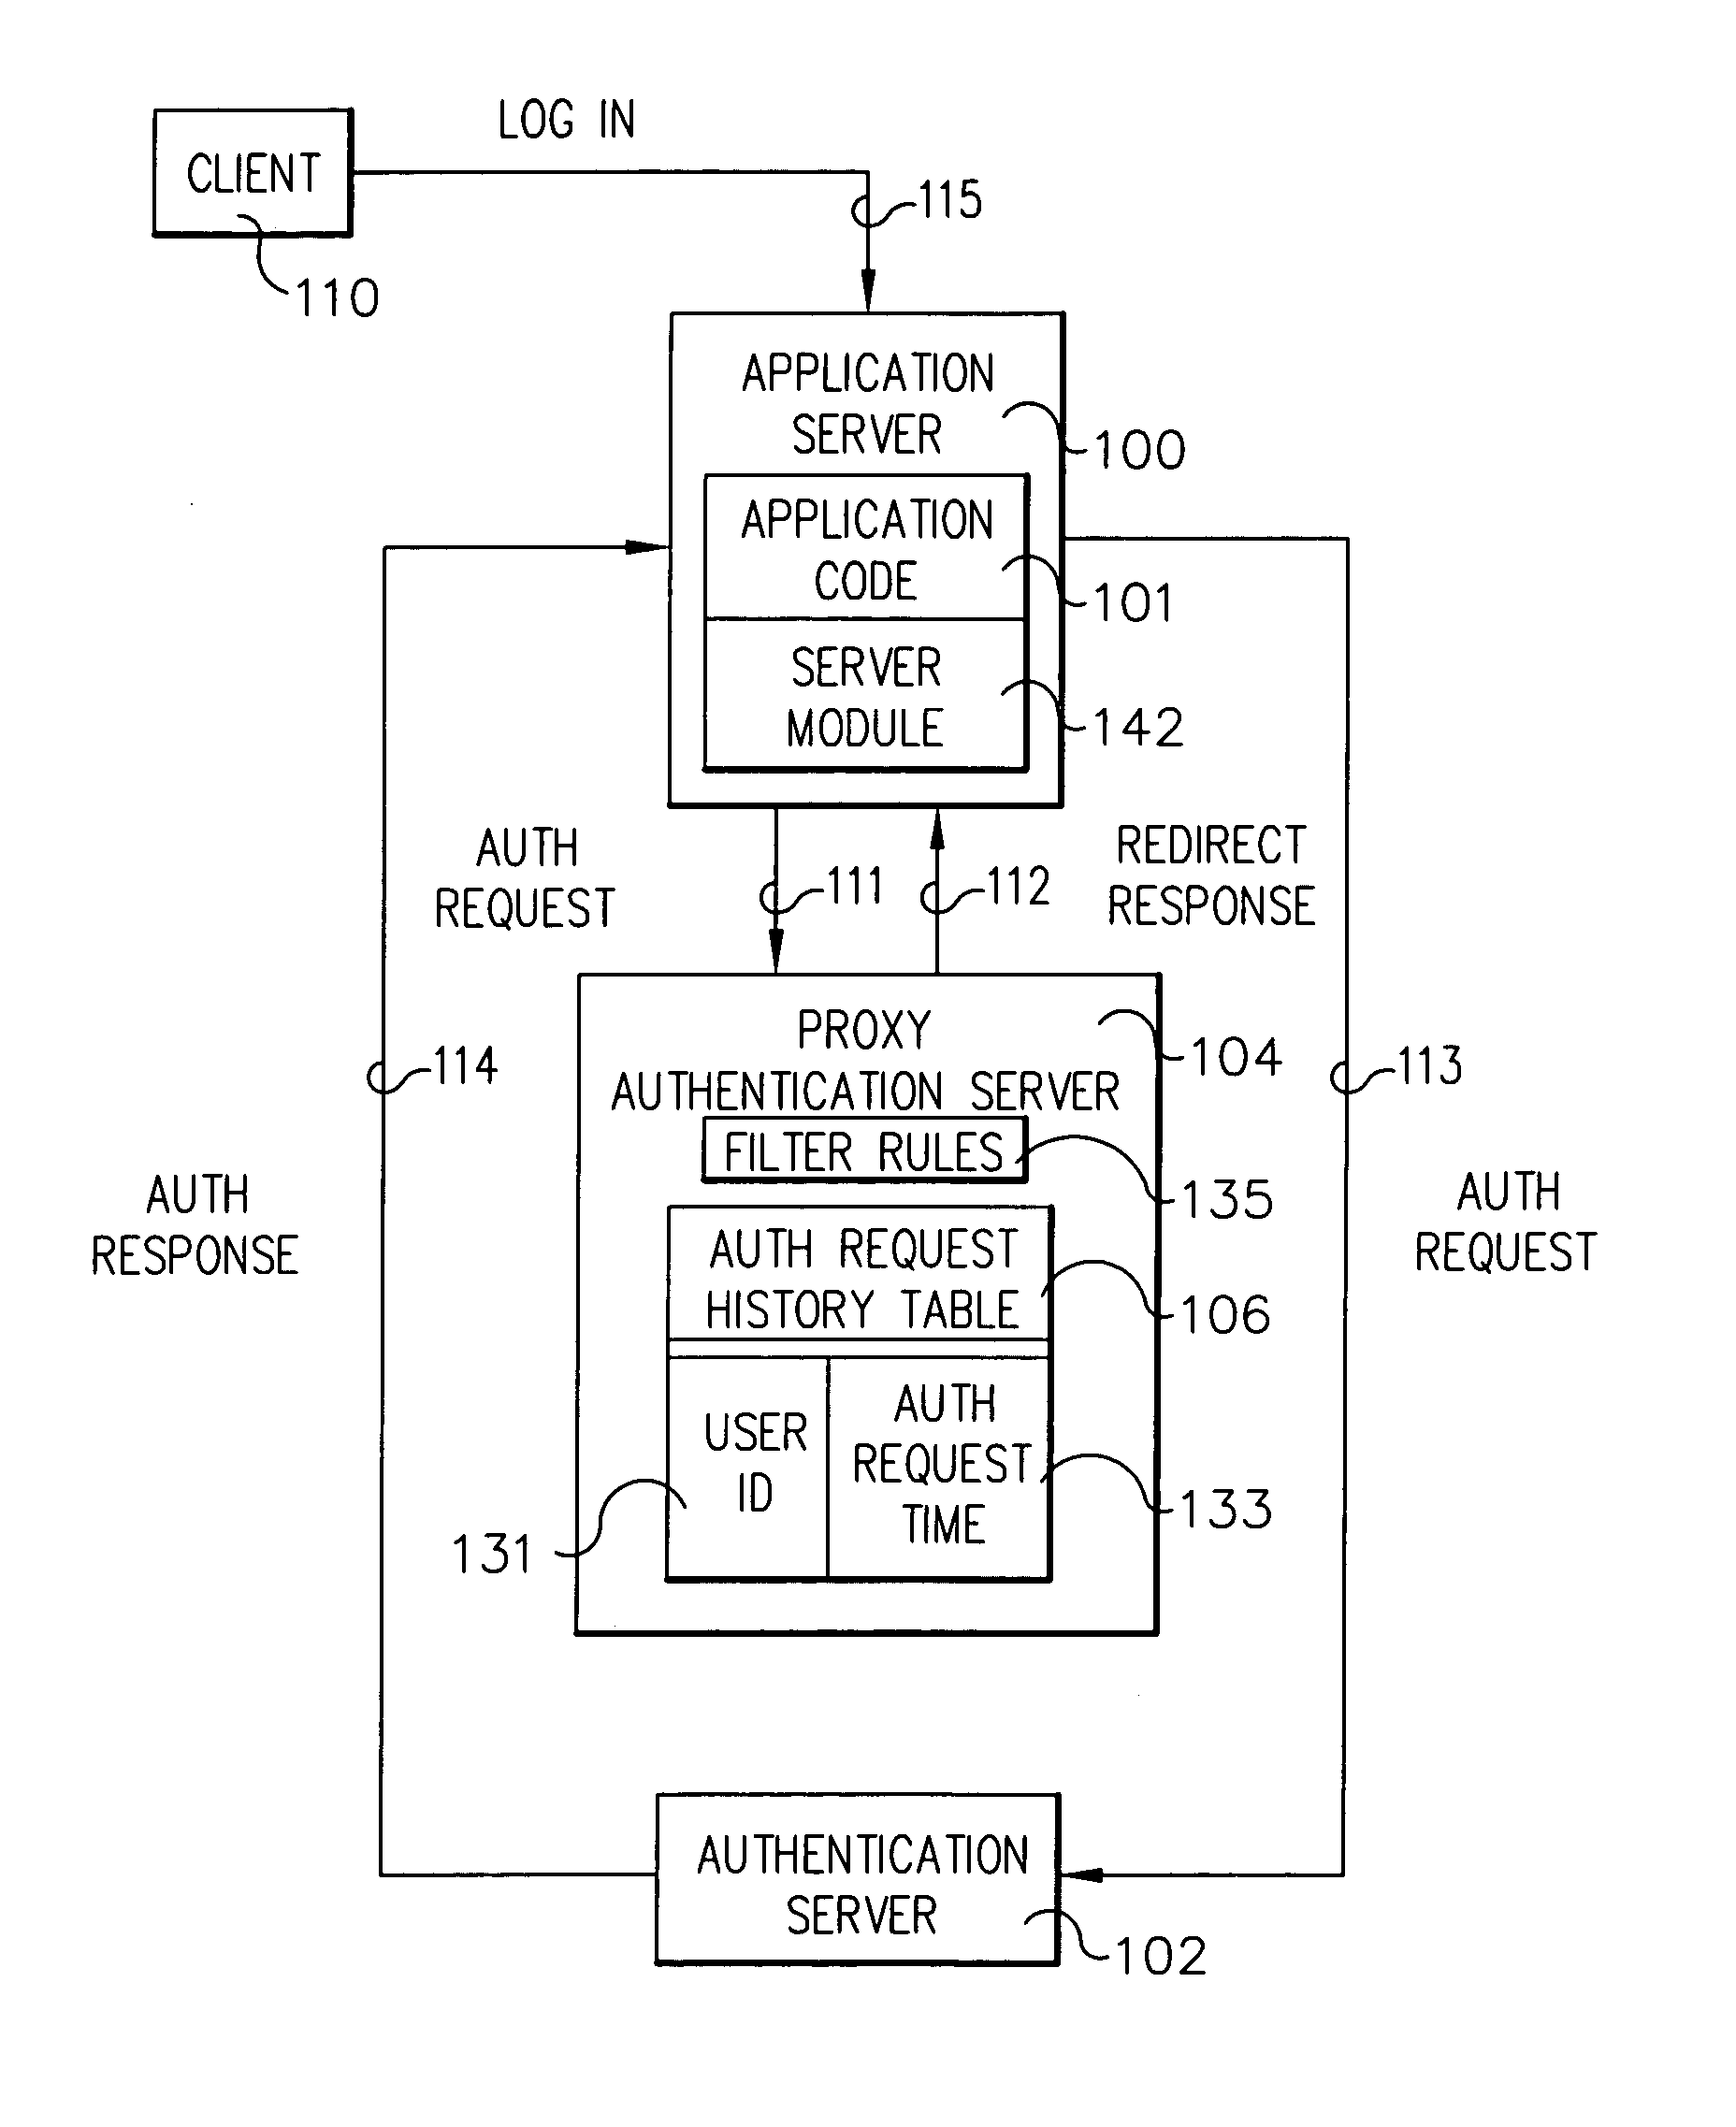 System and method for protecting a server against denial of service attacks